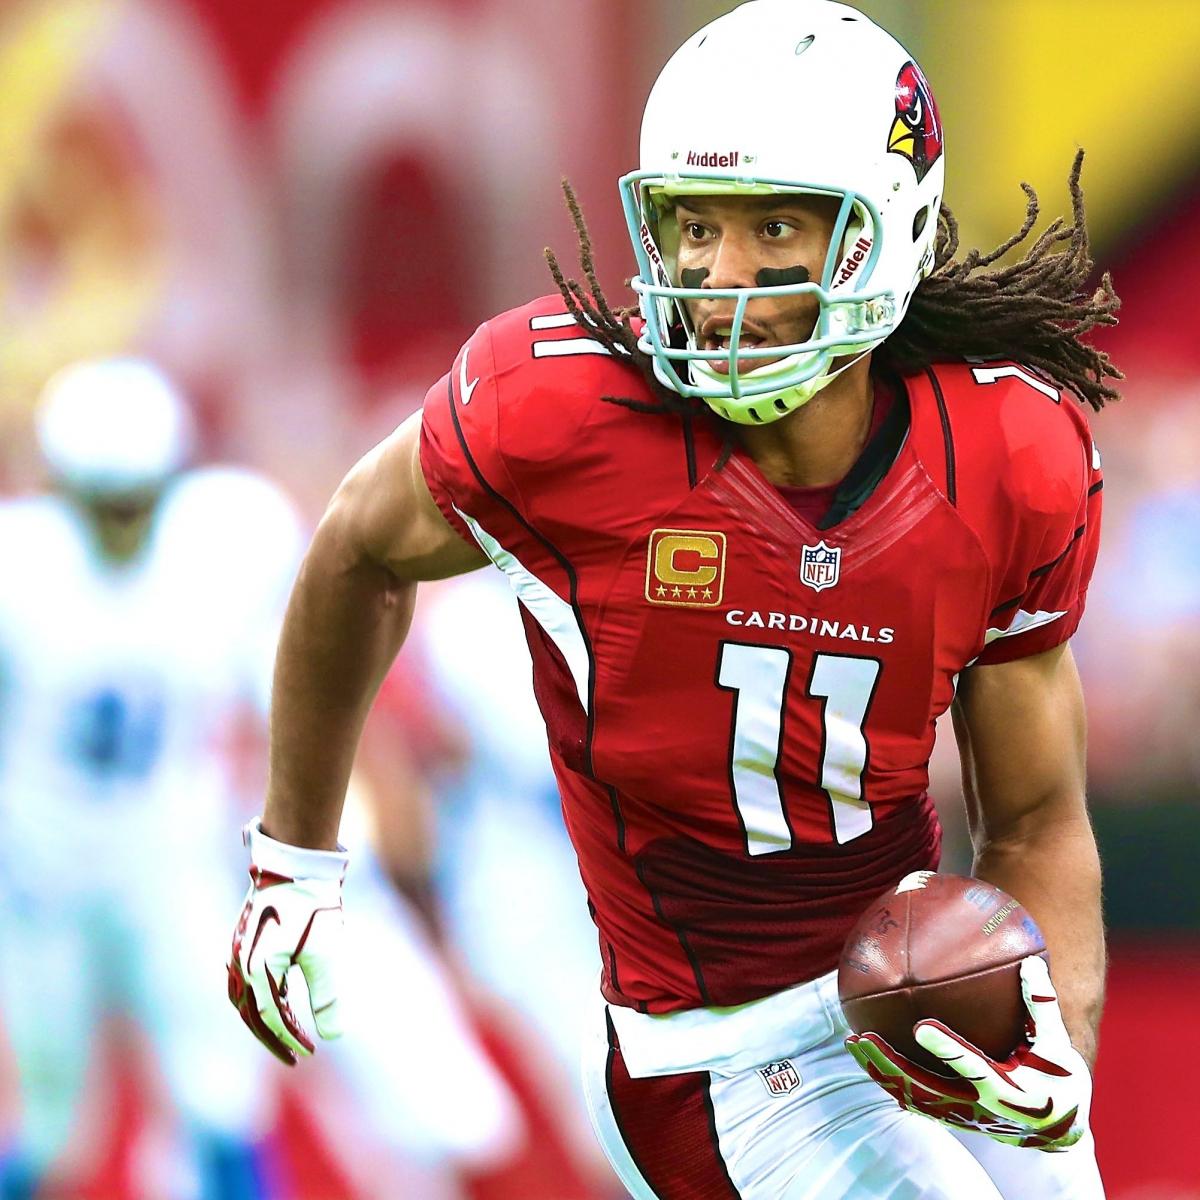 How Larry Fitzgerald became the wealthiest wide receiver in NFL